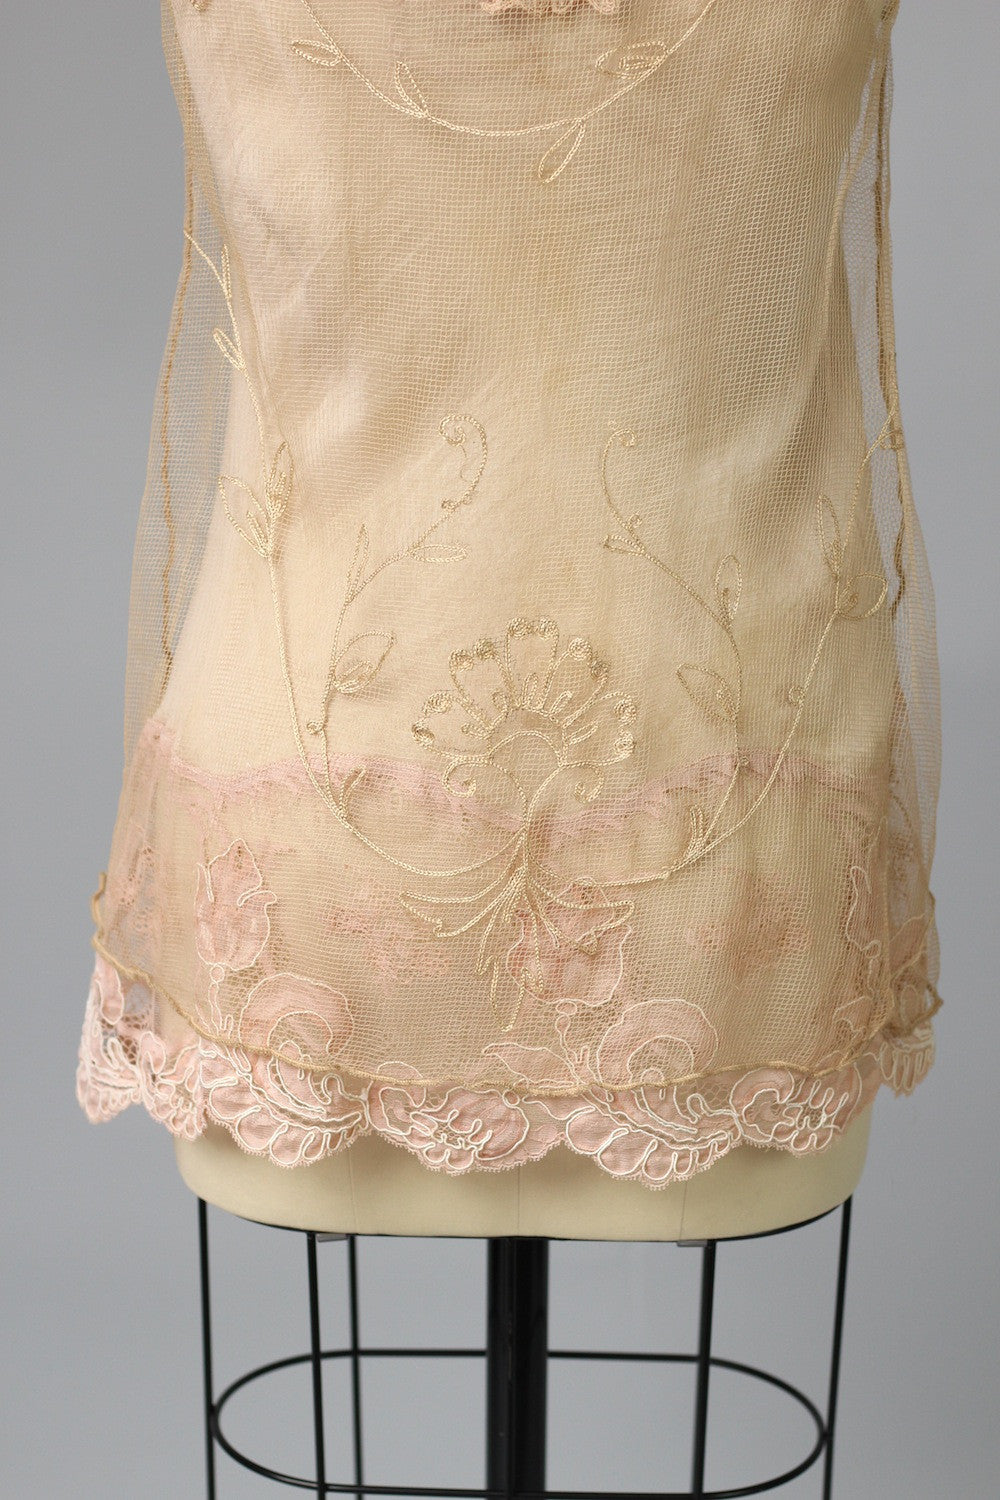 Antique French Tambour Lace Tank Top by Bonnie Strauss